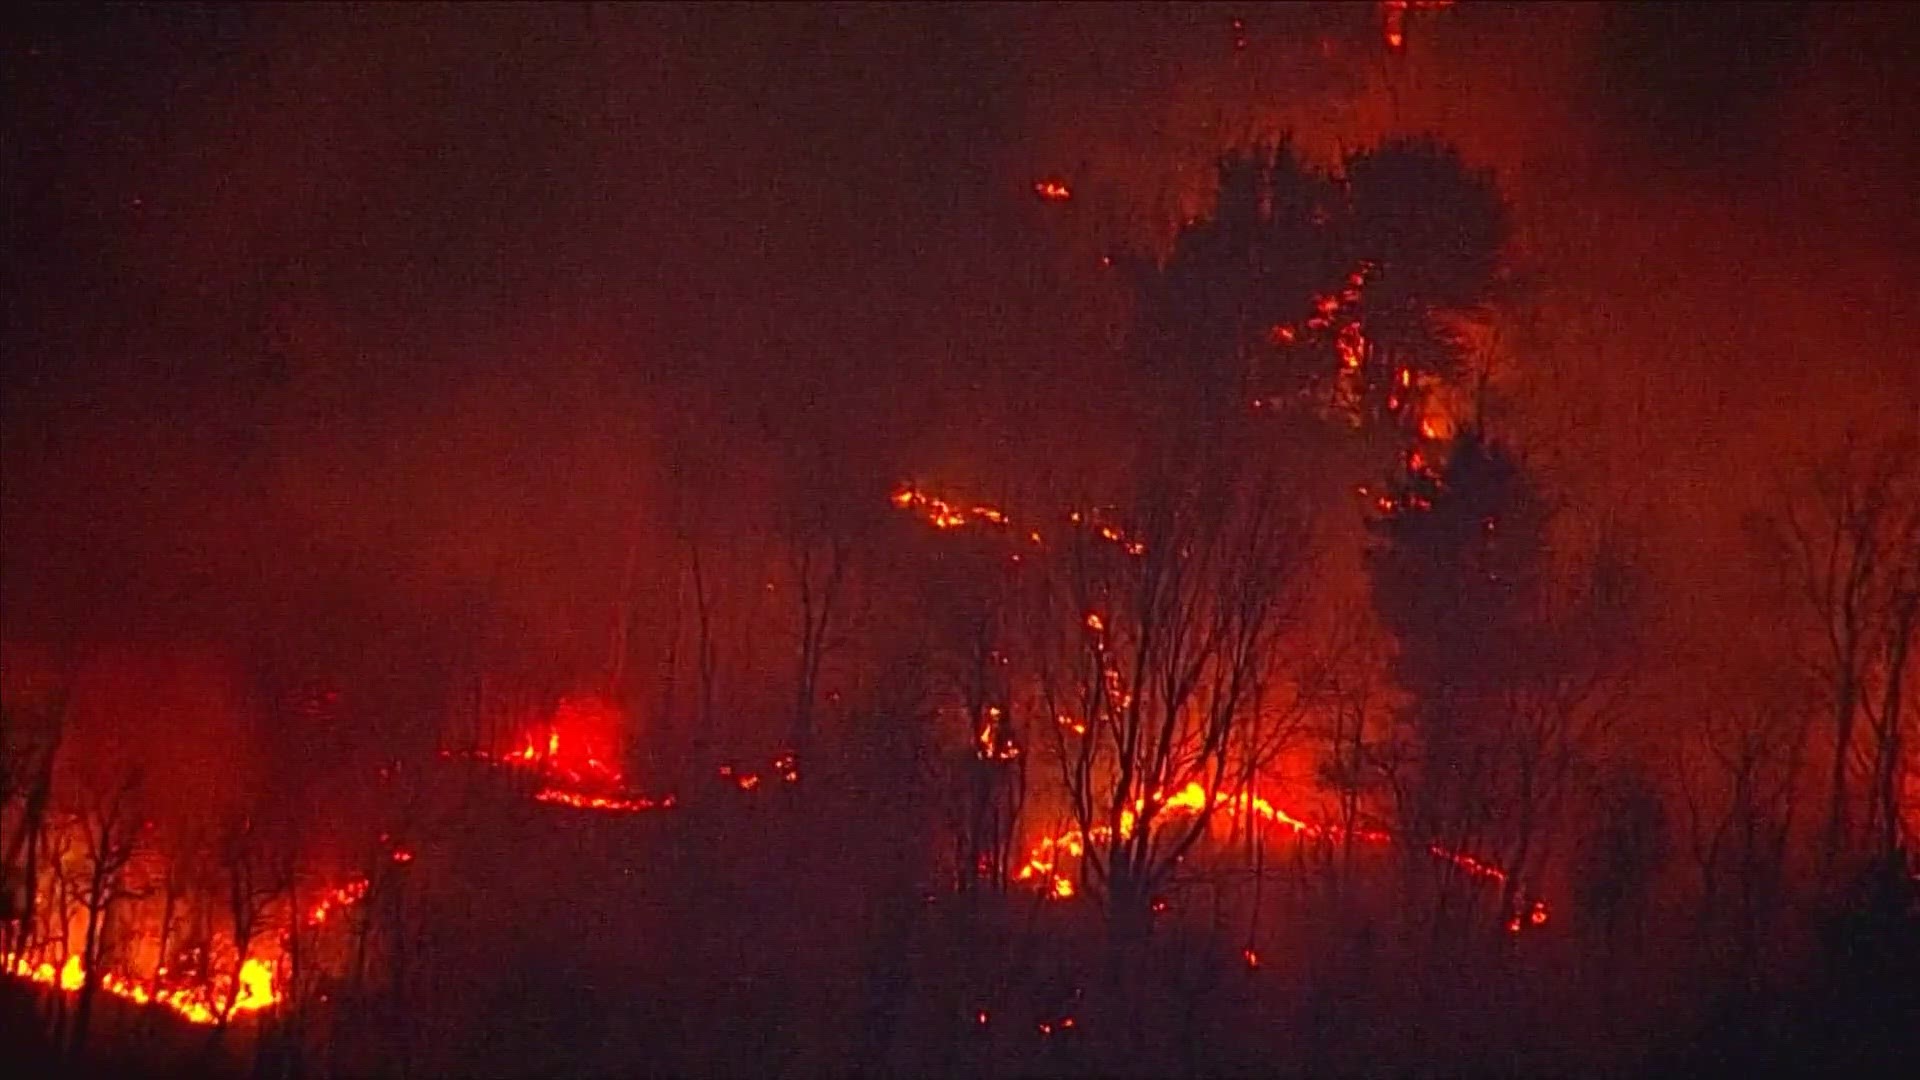 According to the Virginia Department of Forestry most of the fires are between 50-70% contained.